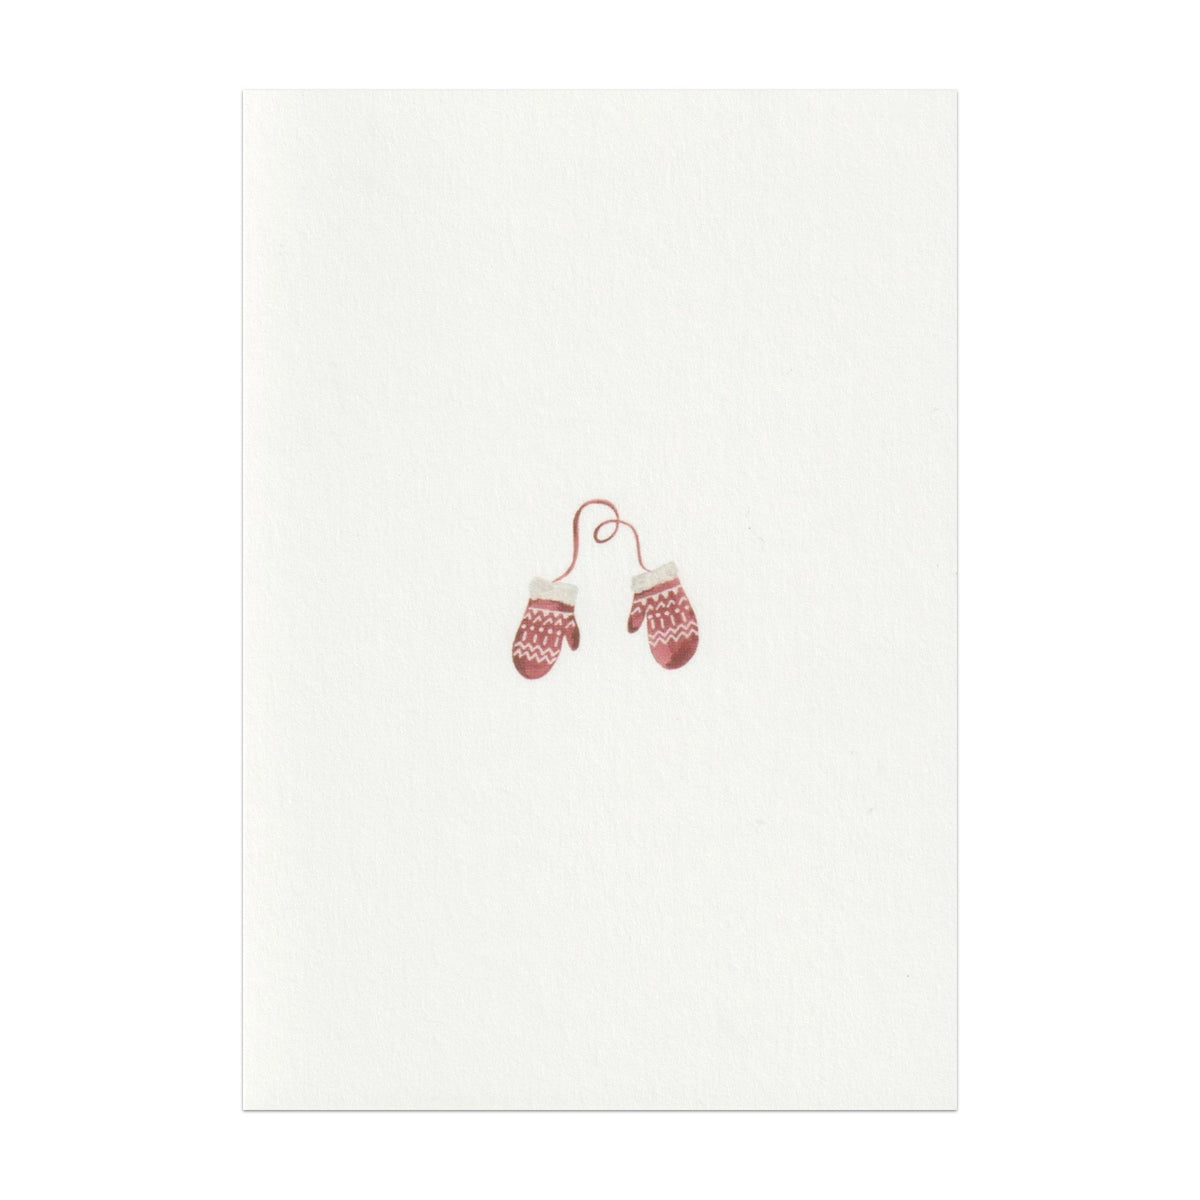 Luxury Christmas Card by Memo Press with a watercolour illustration of a pair of red and white mittens and comes with an oat envelope made in Britain